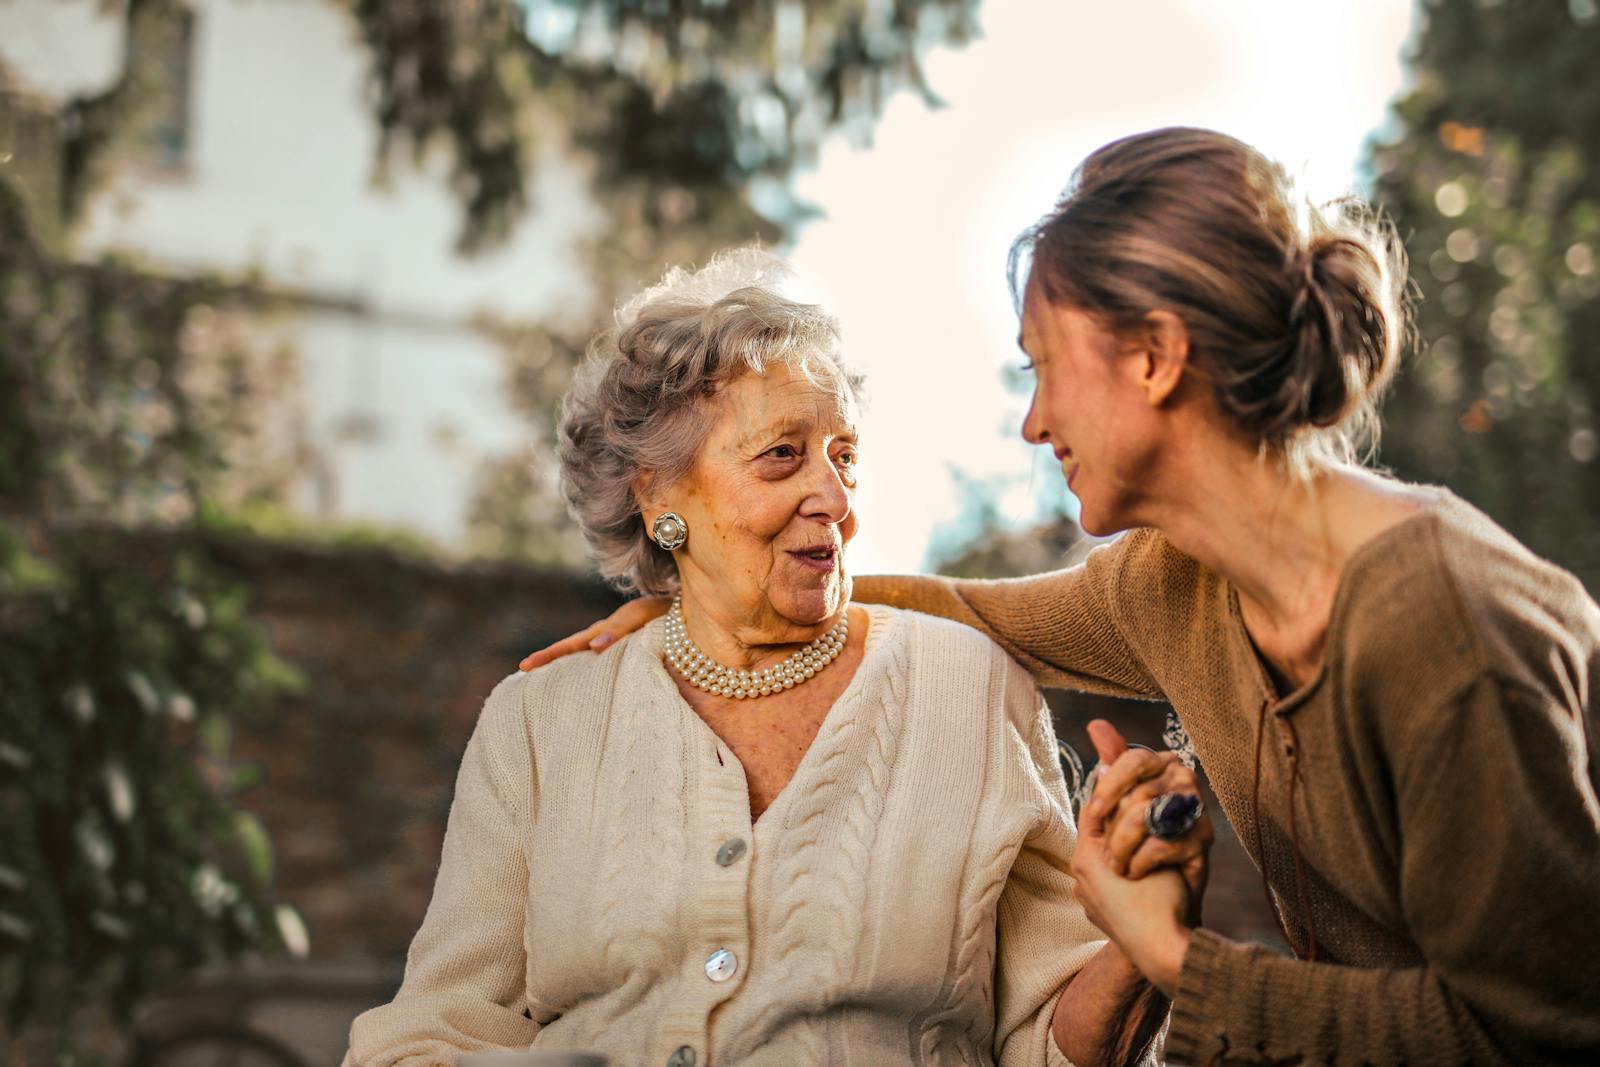 Assisted Living: A Socially Responsible Investment